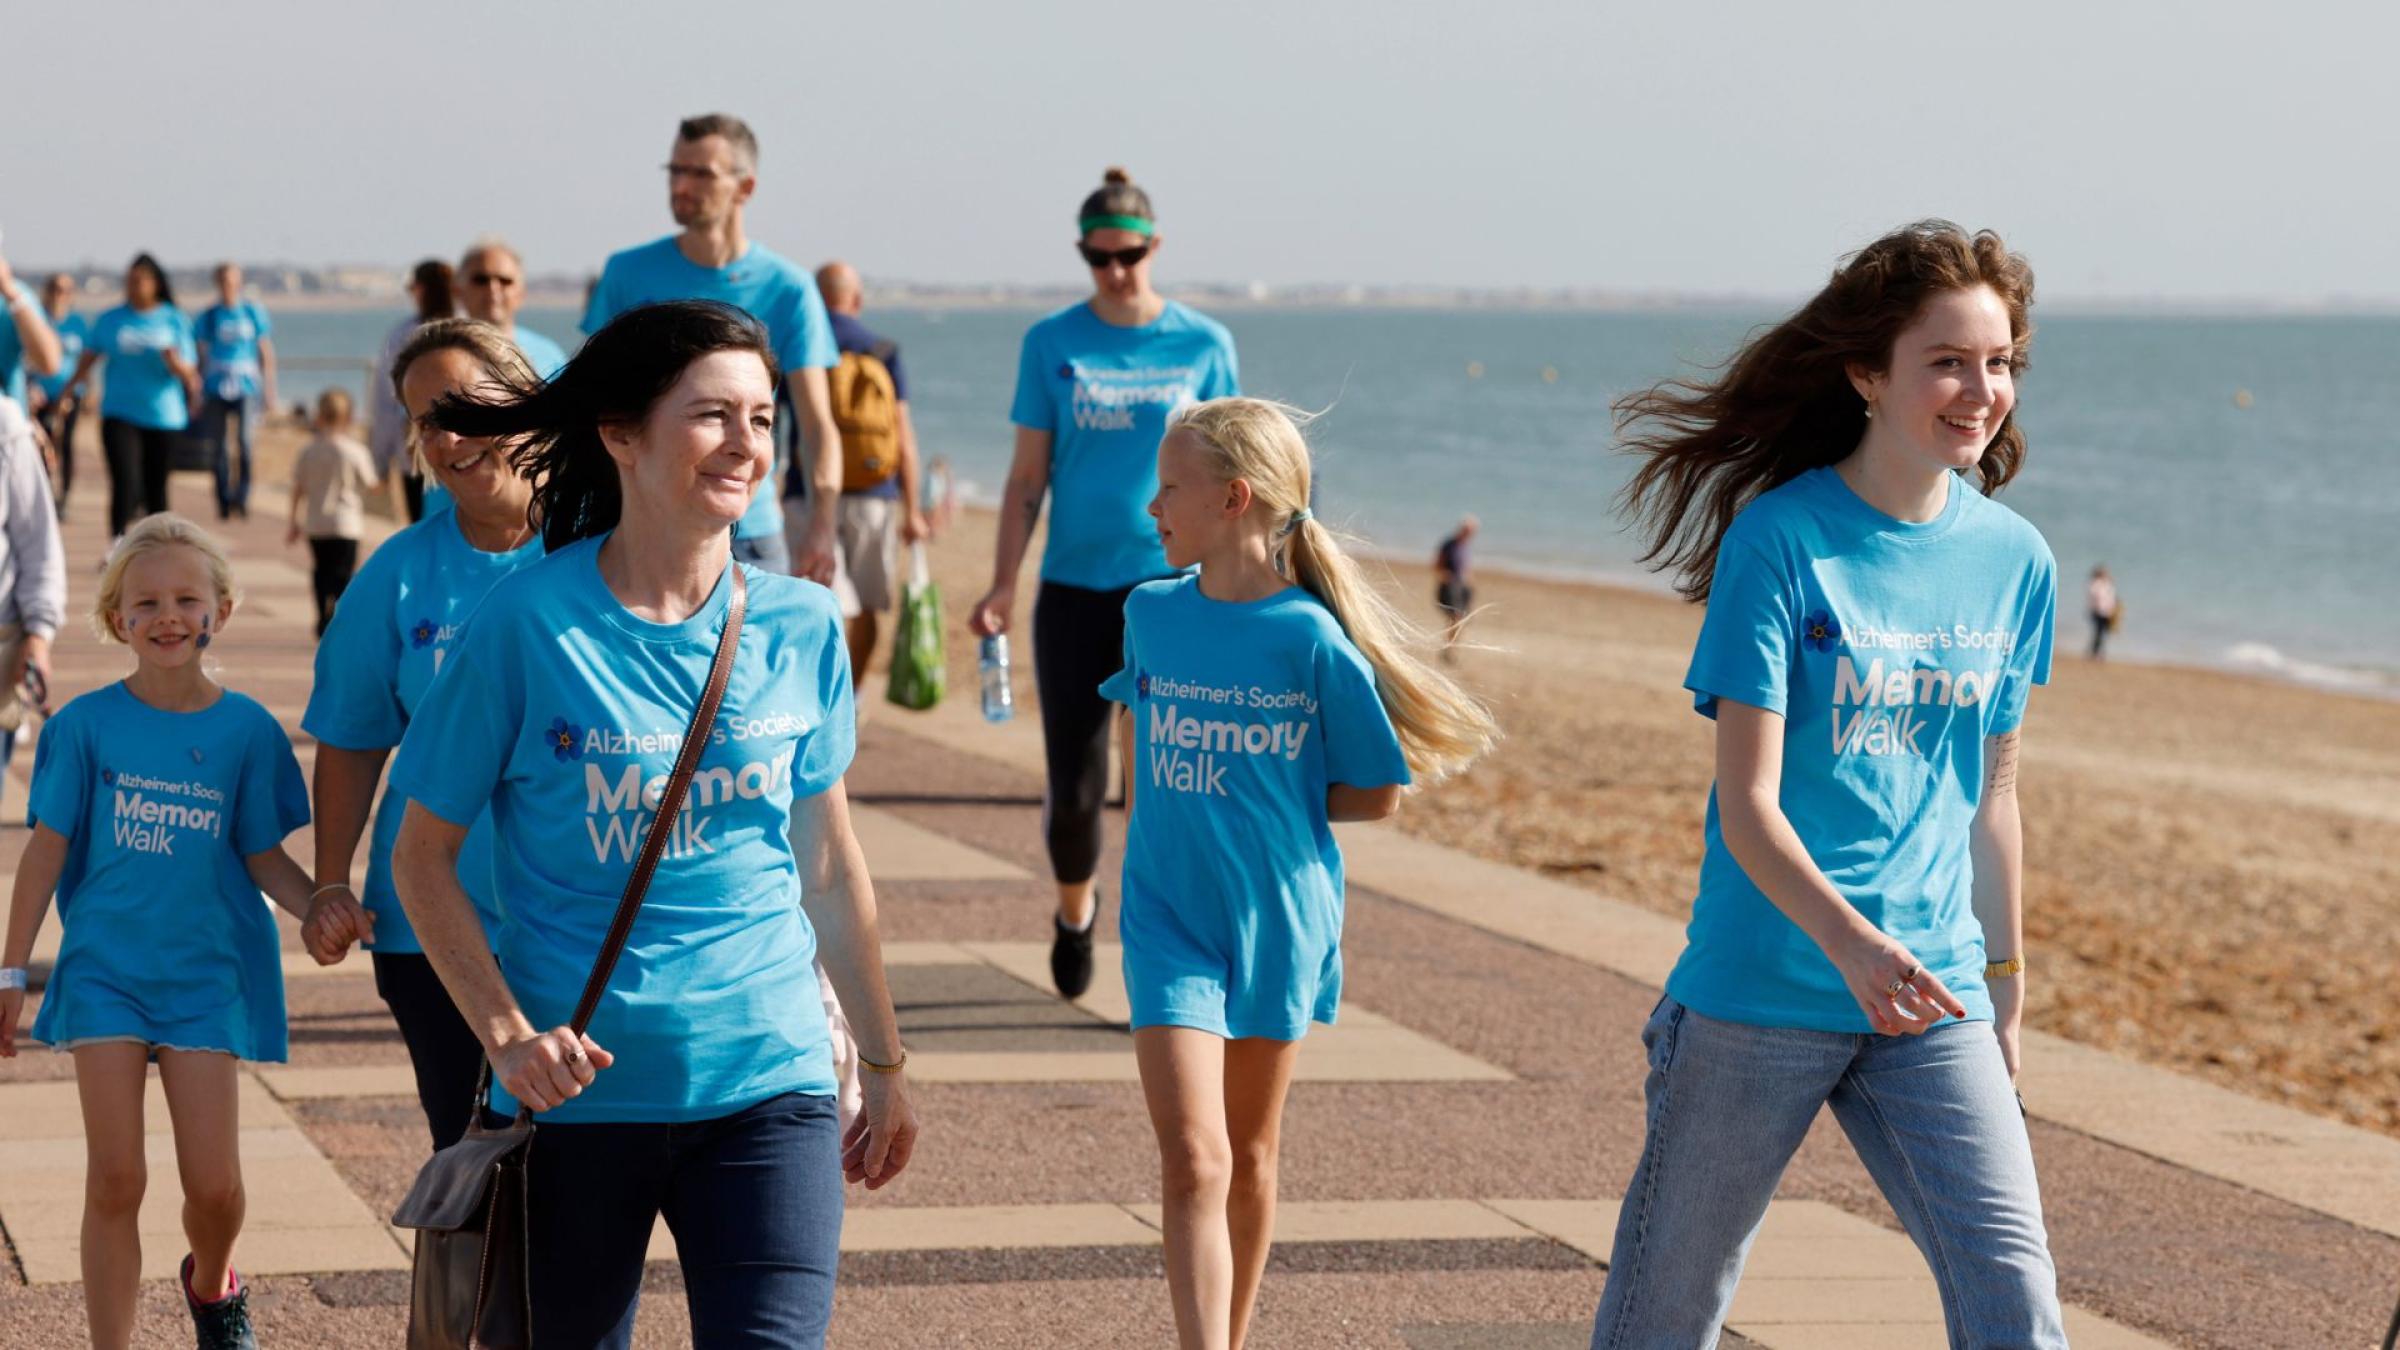 Image of supporters taking part in Memory Walk on the beach